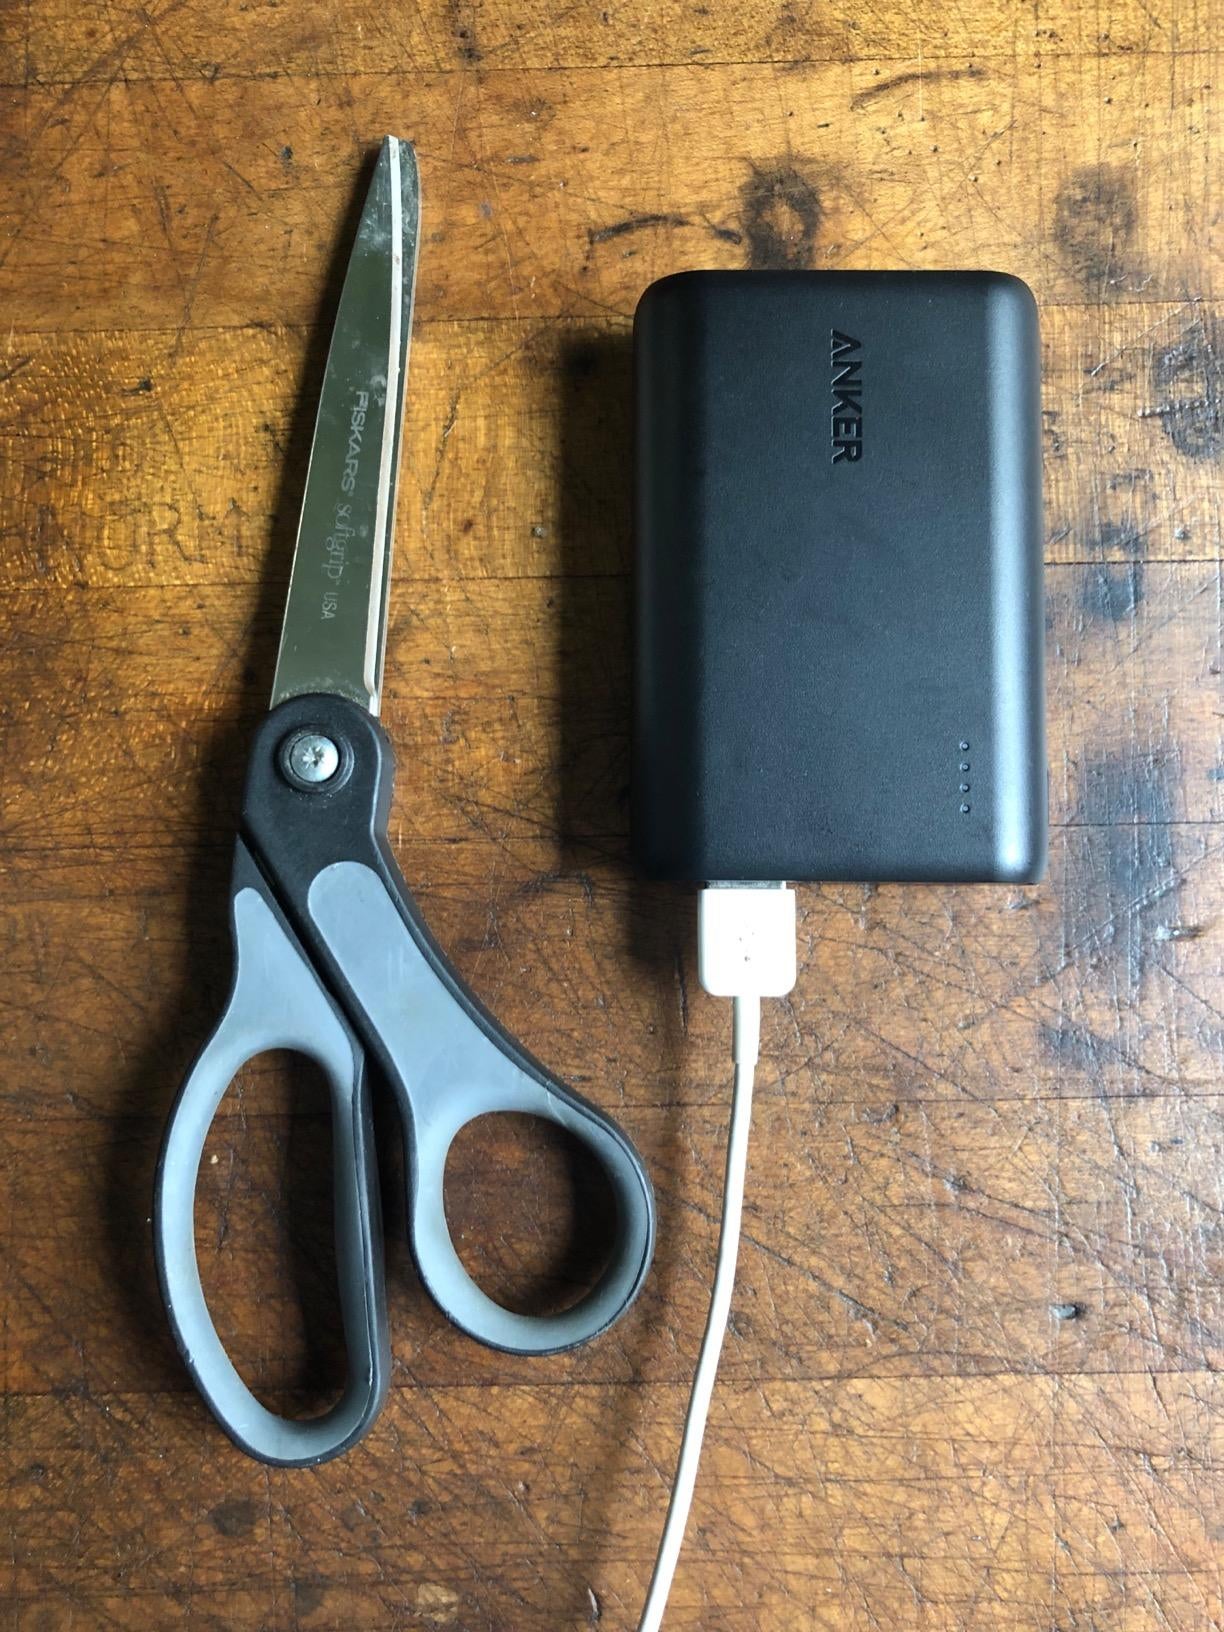 The rectangular portable charger next to a pair of scissors that are larger than it to show its size